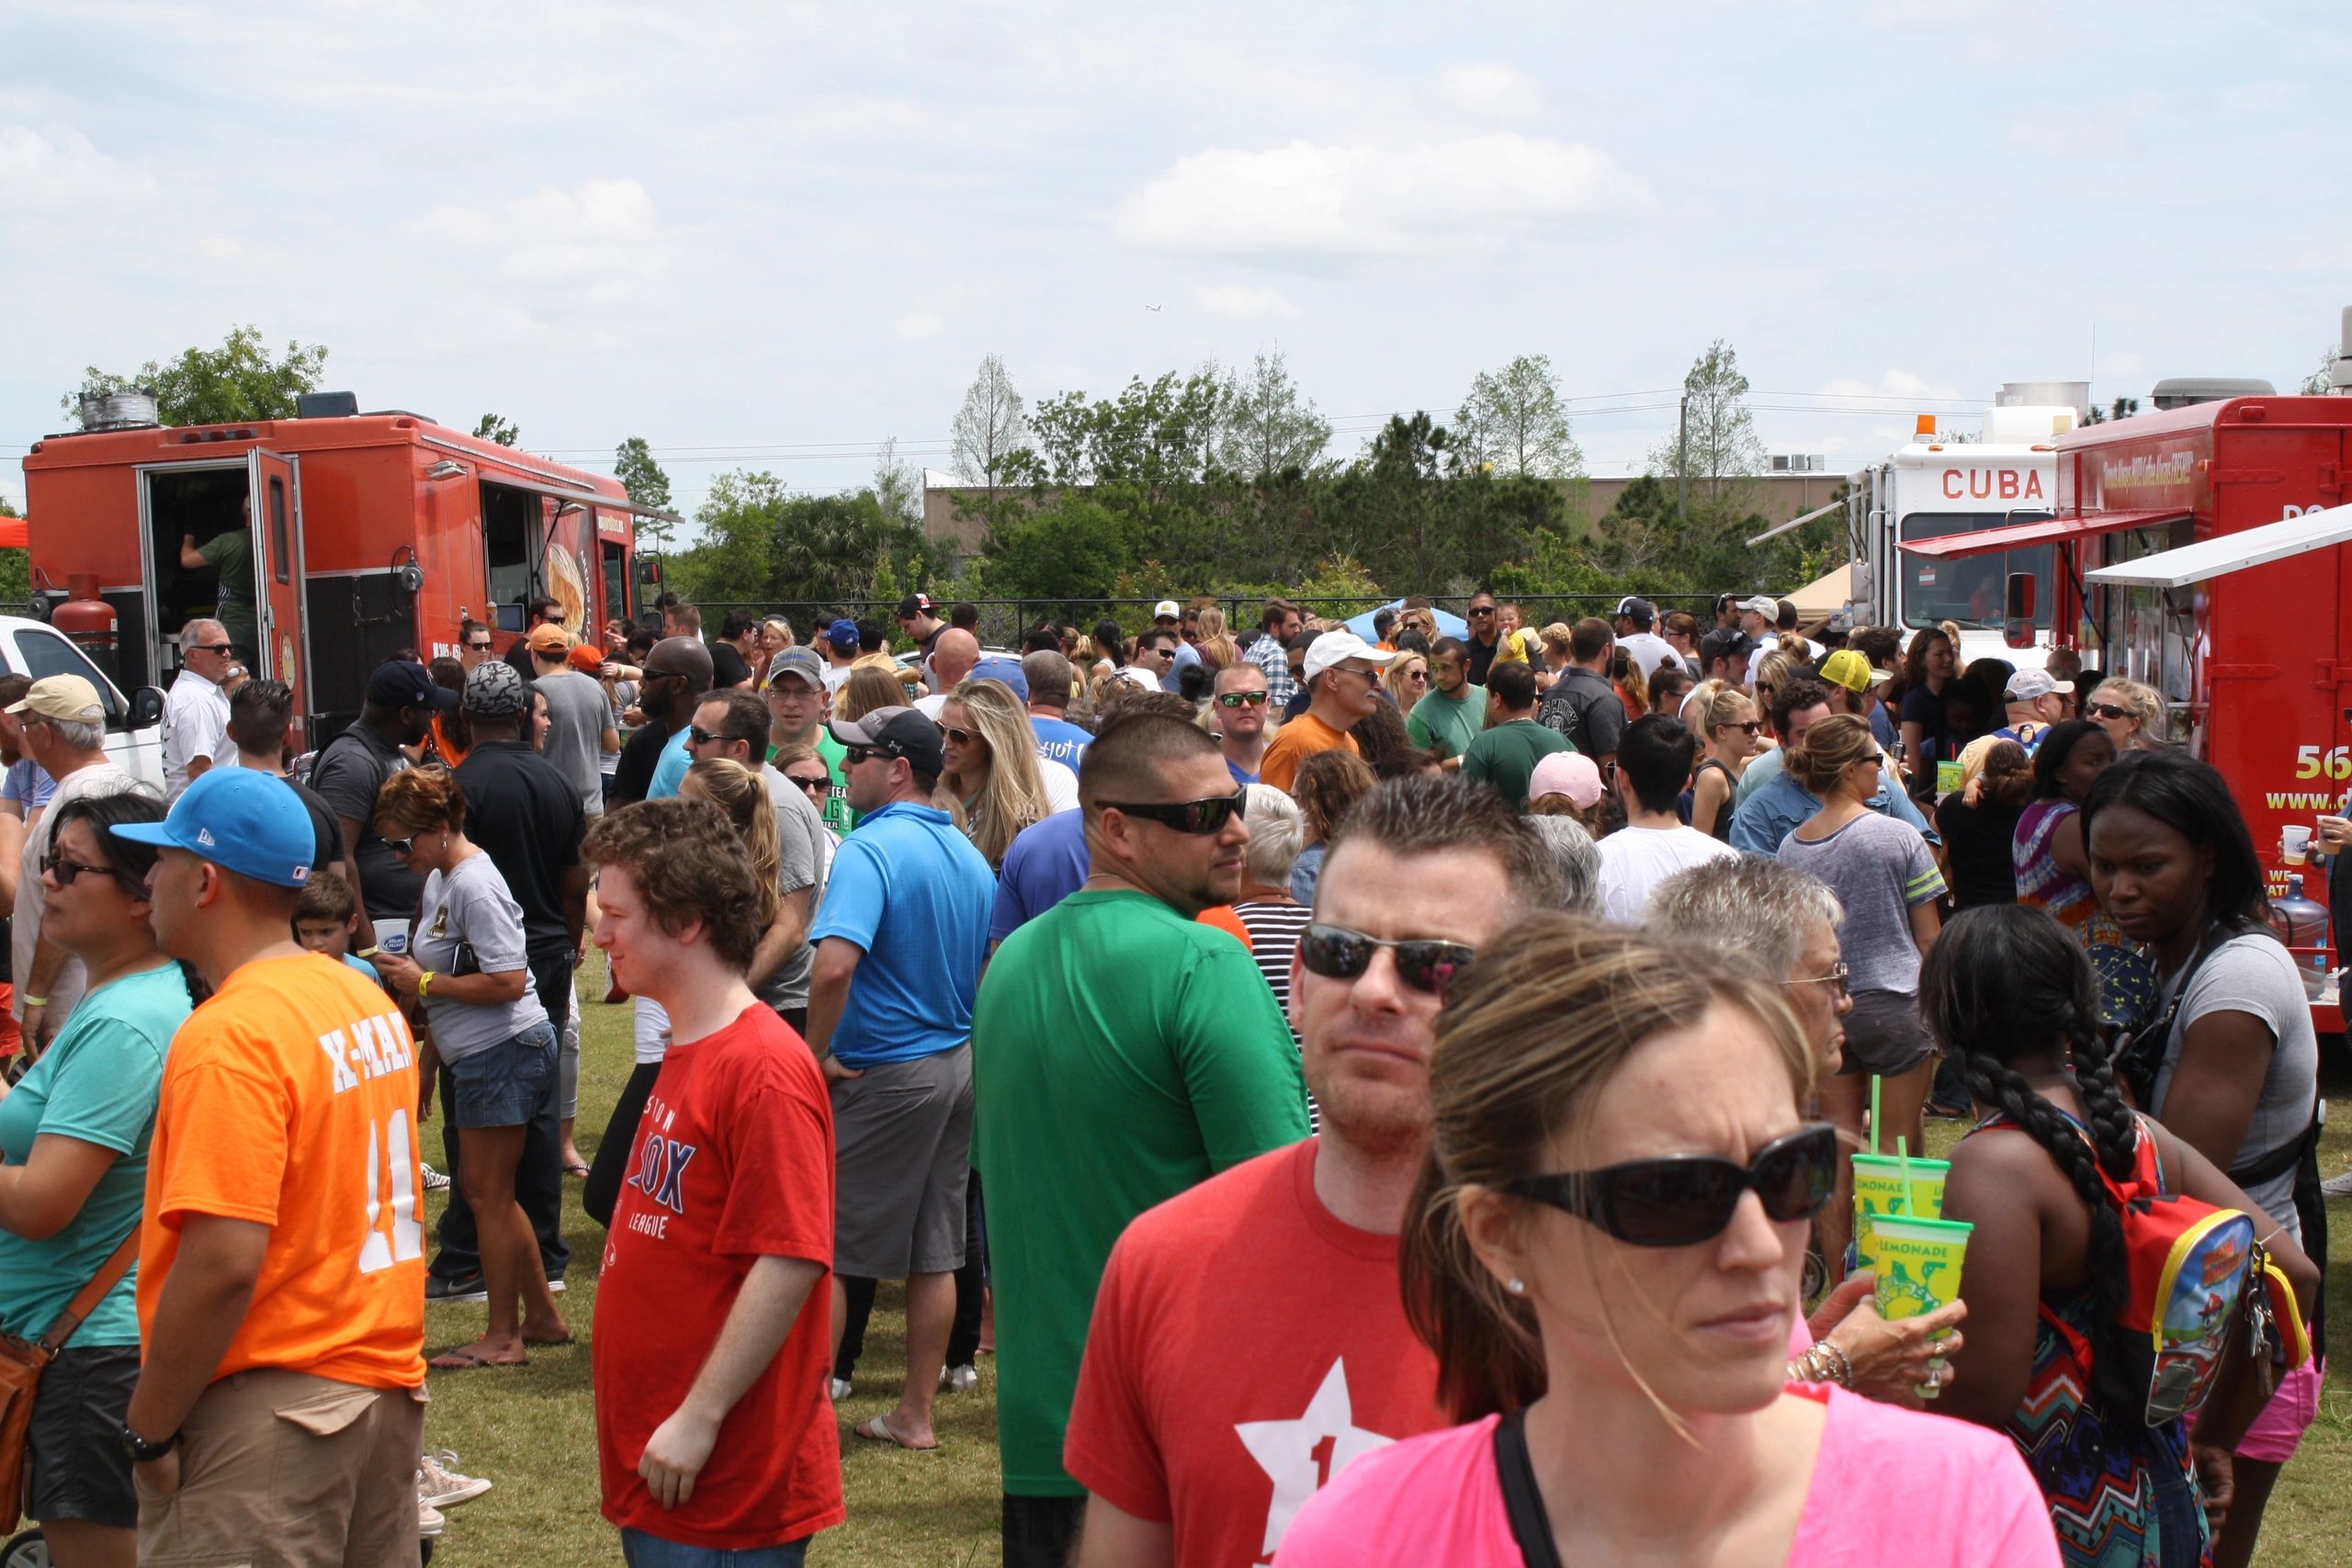 Orlandos Food Trucks at one of our largest events ever.